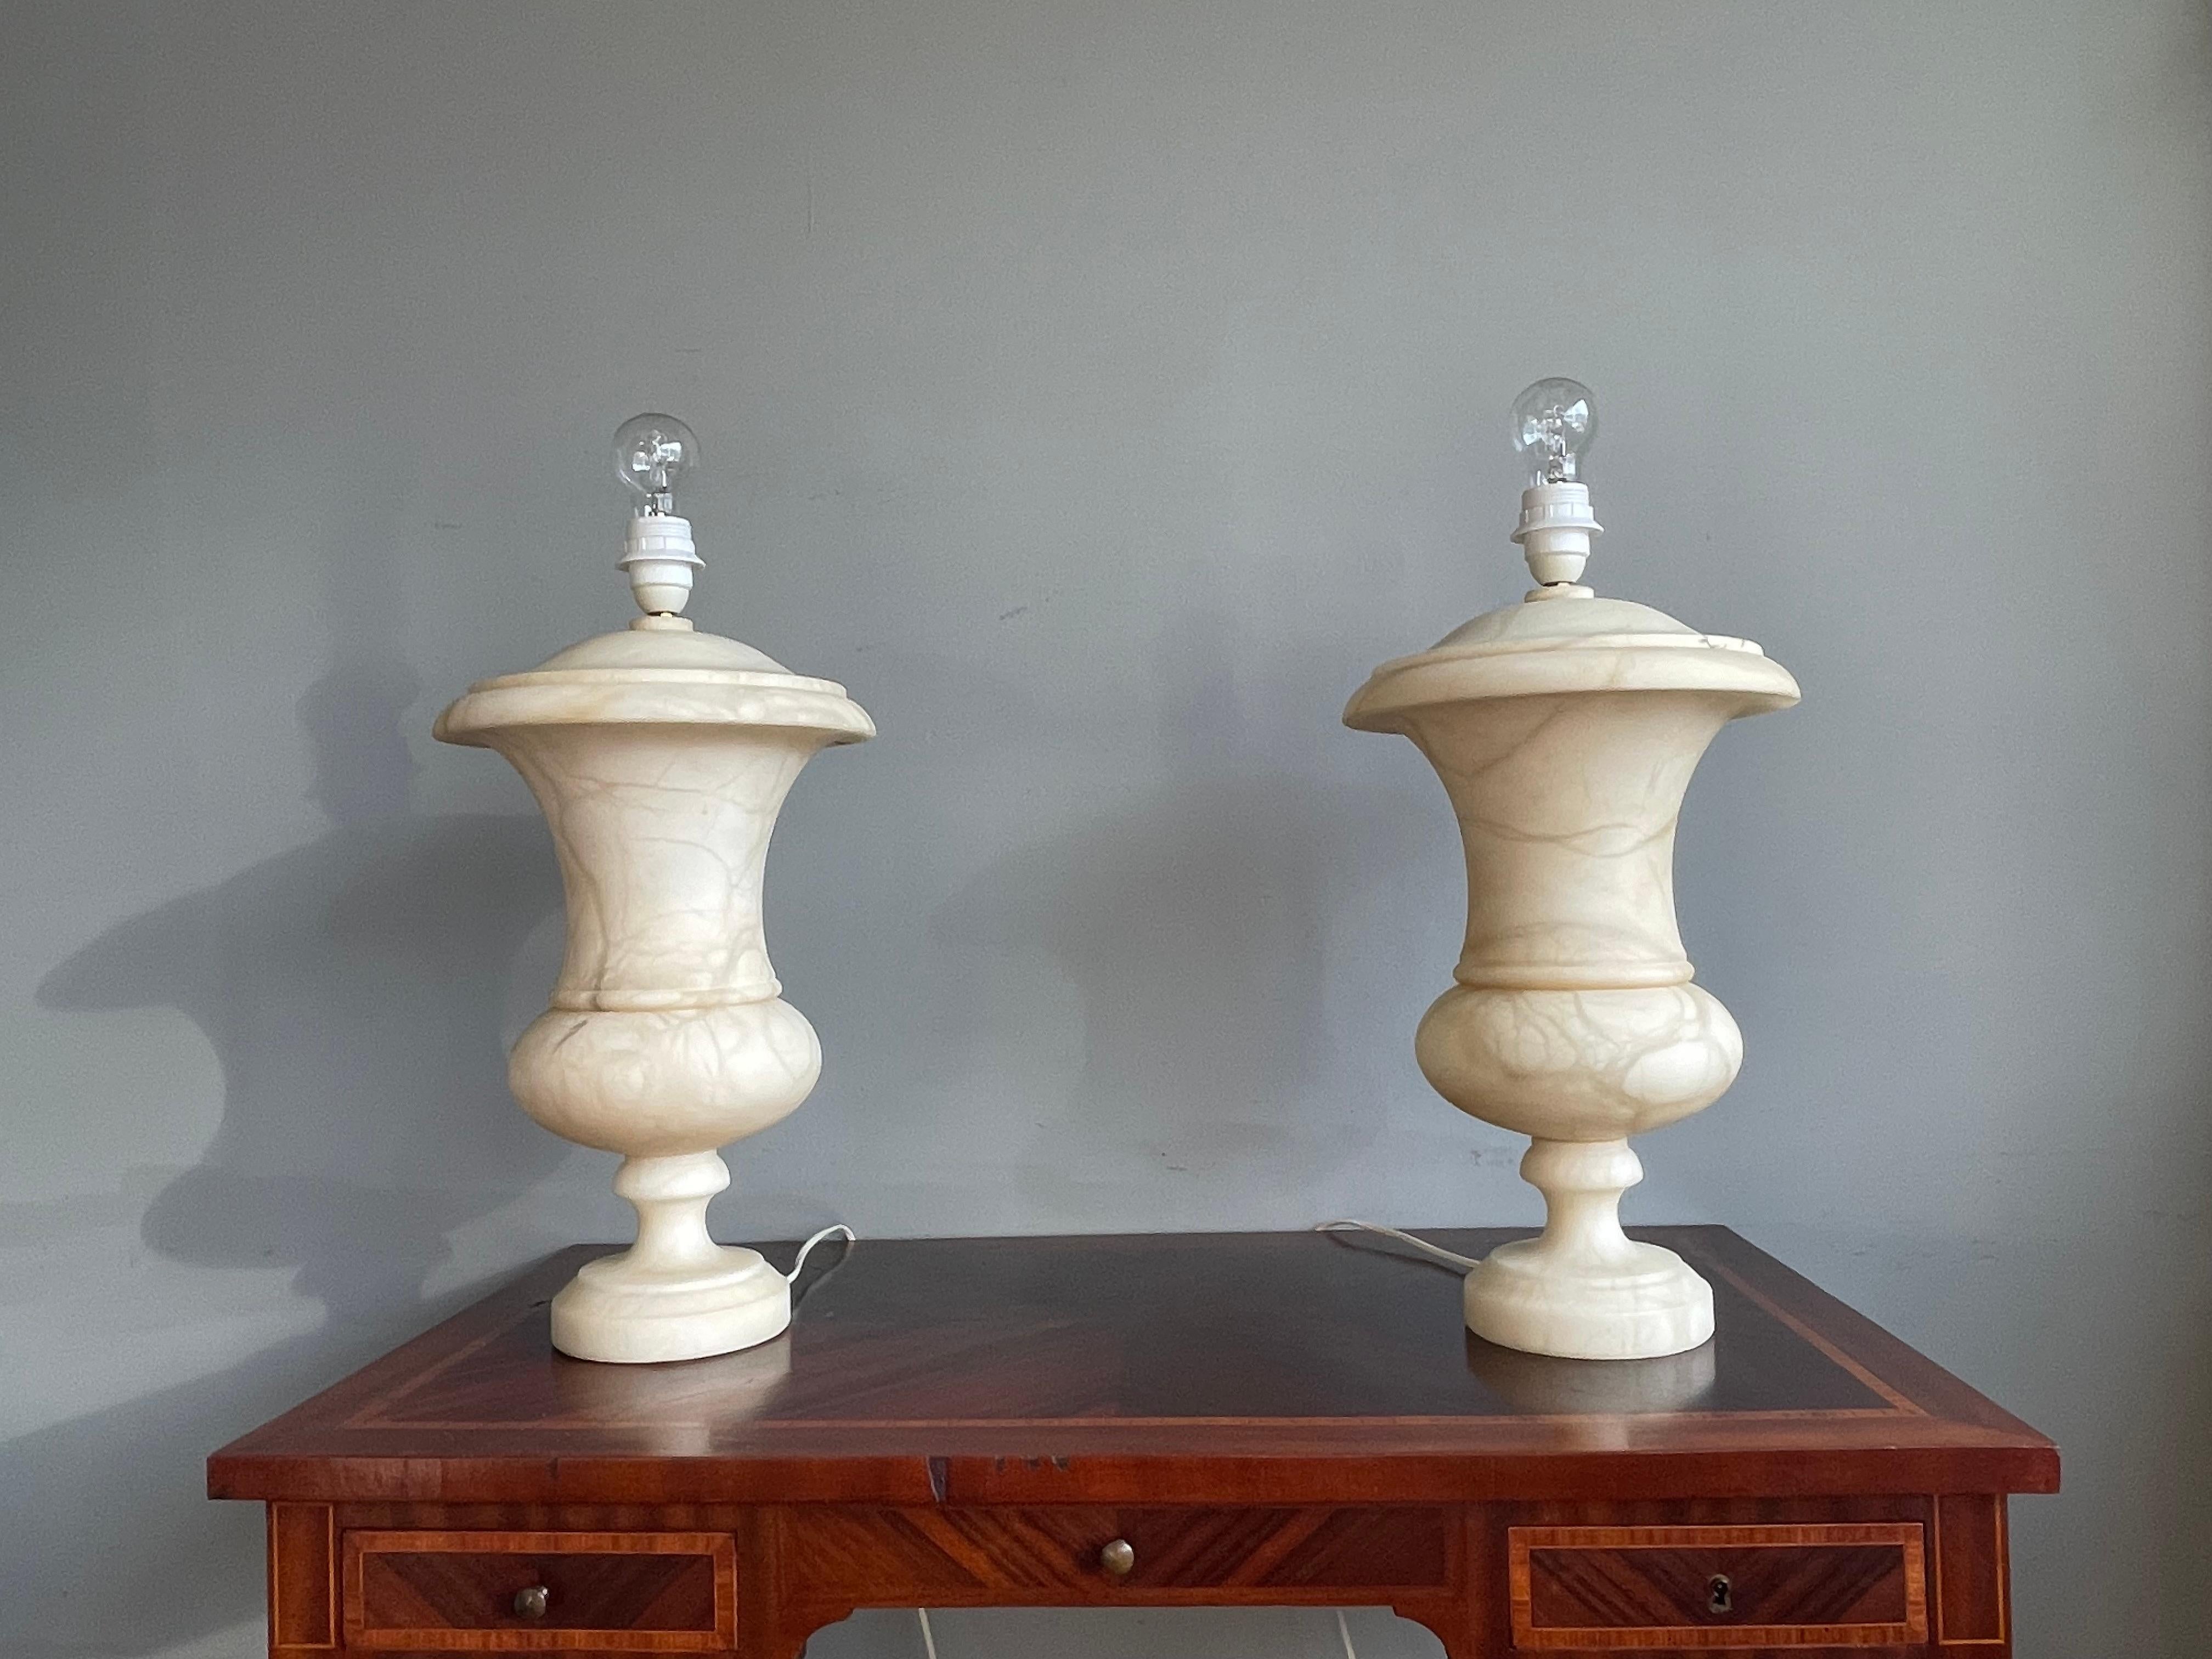 Hand-Crafted Stunning & Large Pair of Hand Carved Alabaster Urn Design Table lamps 1960-1970s